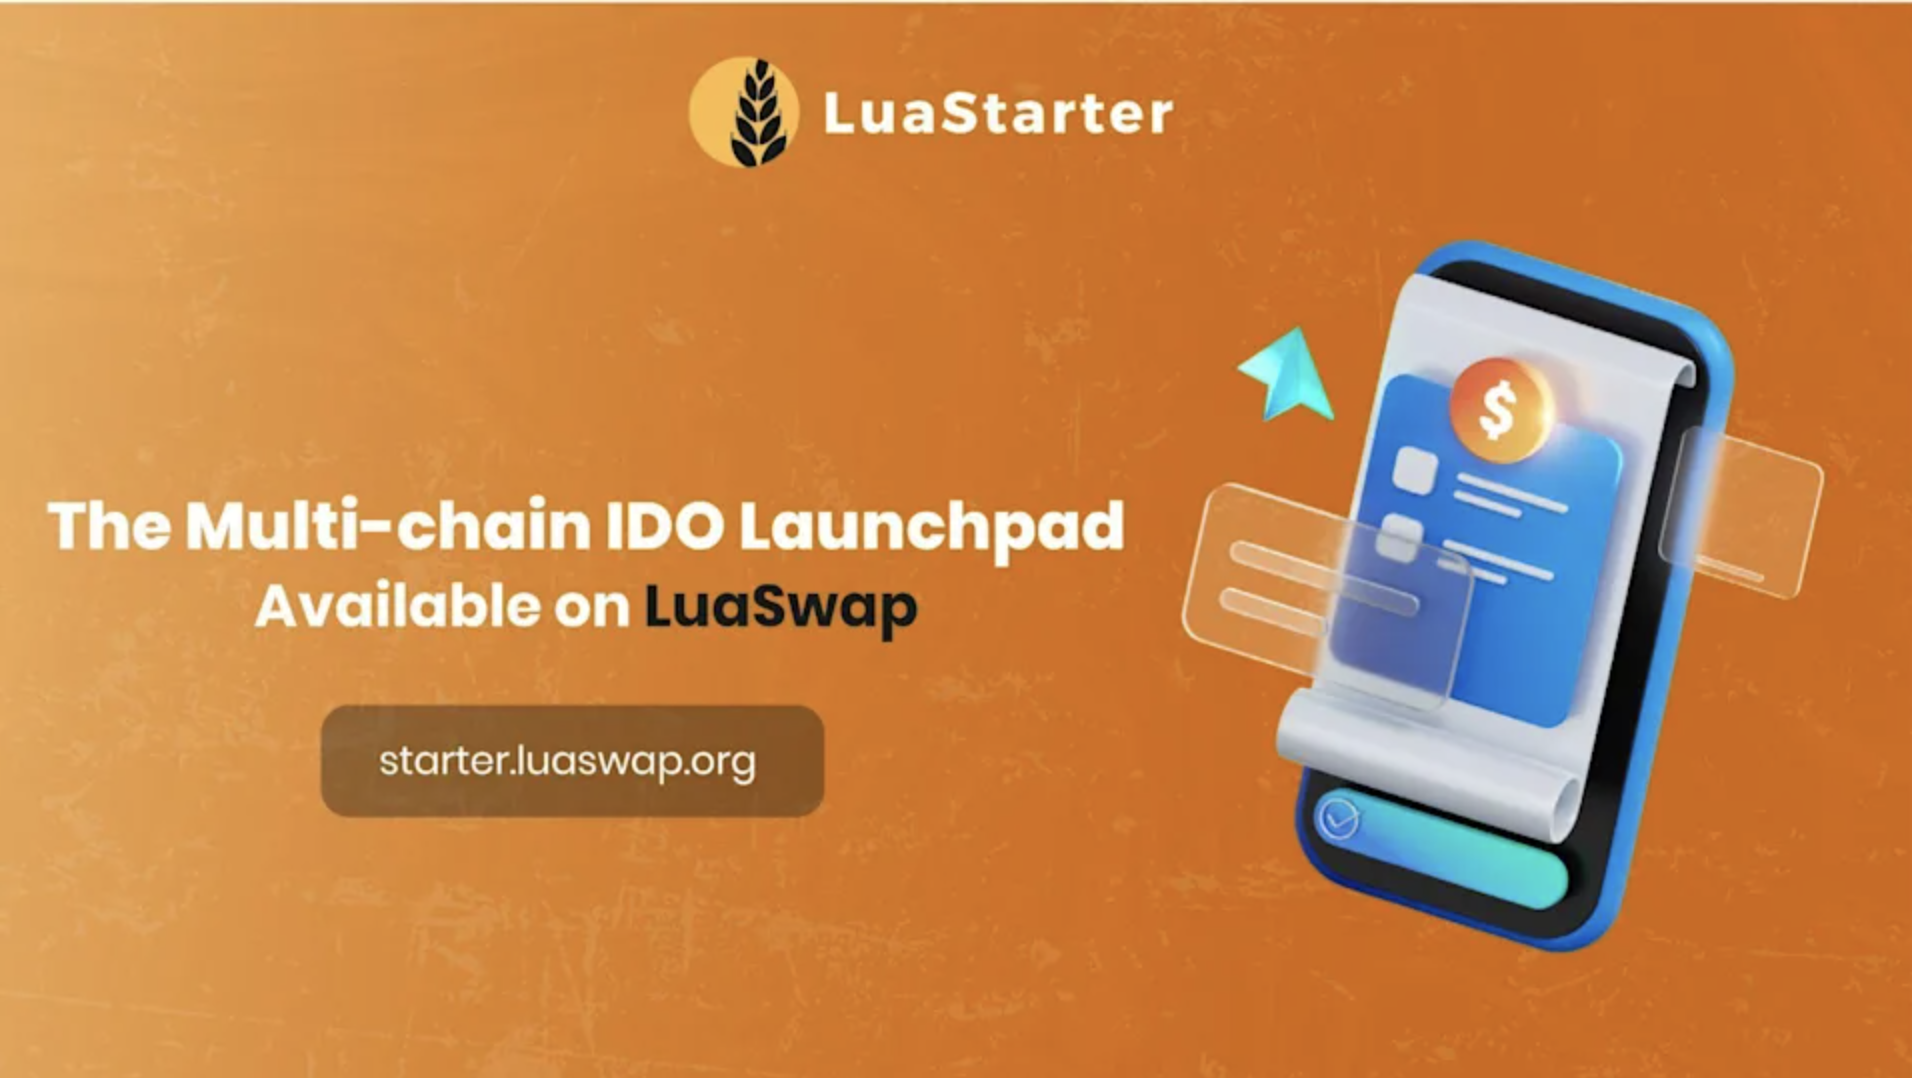 TomoChain Lab announces the dual launch of a new multi-chain IDO platform and a capital investment arm